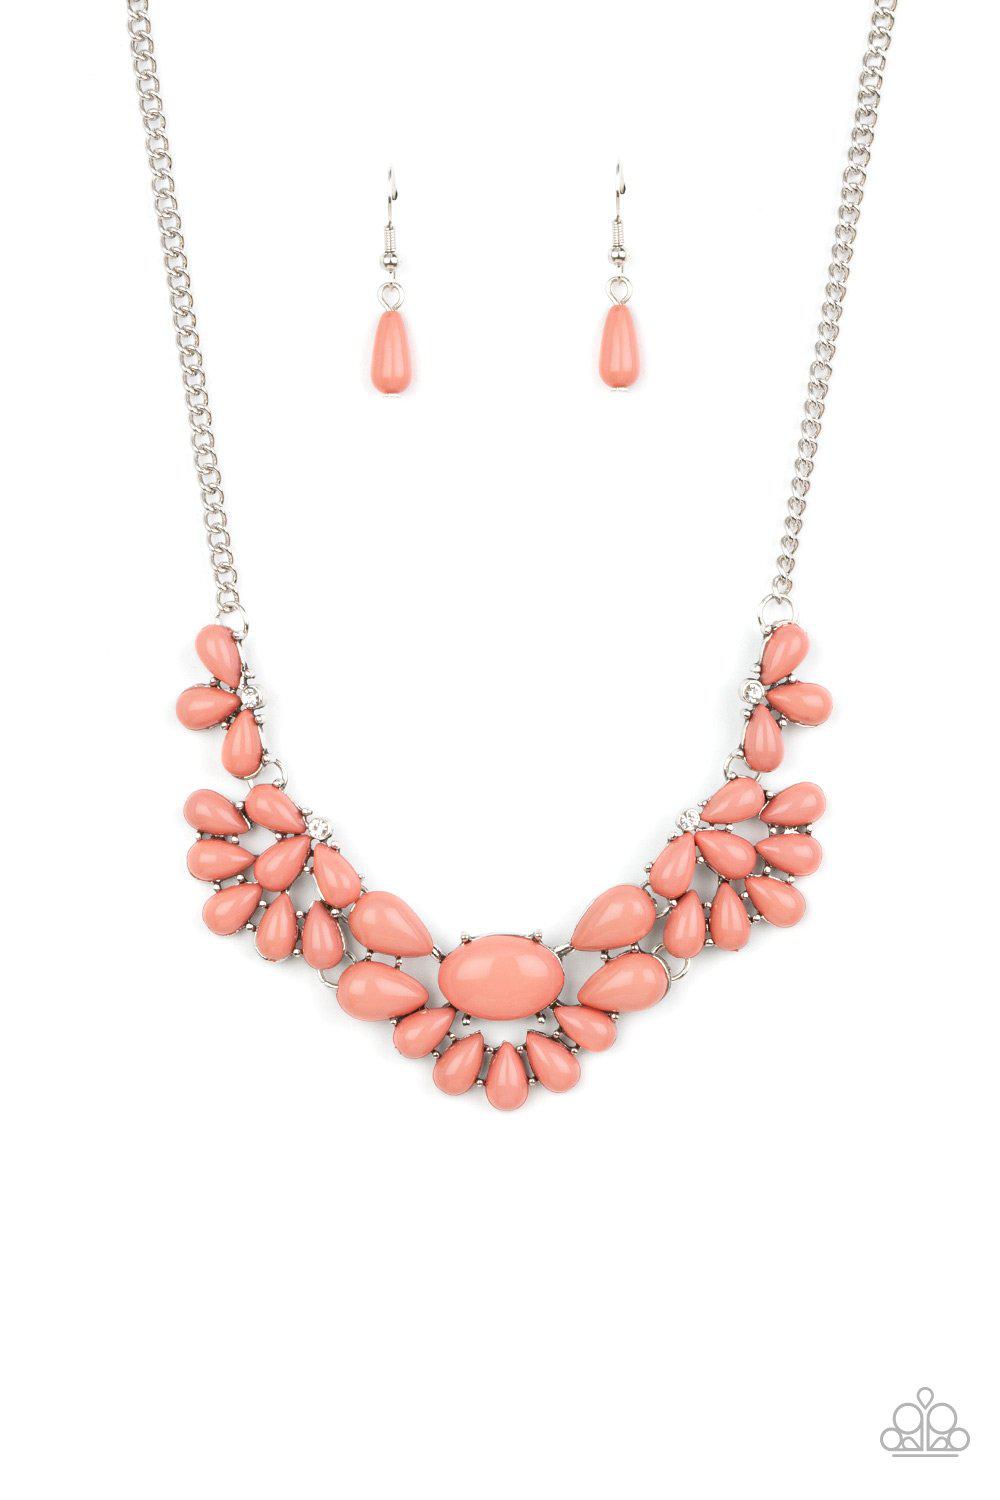 Secret GARDENISTA Pink Necklace - Paparazzi Accessories 2021 Convention Exclusive- lightbox - CarasShop.com - $5 Jewelry by Cara Jewels